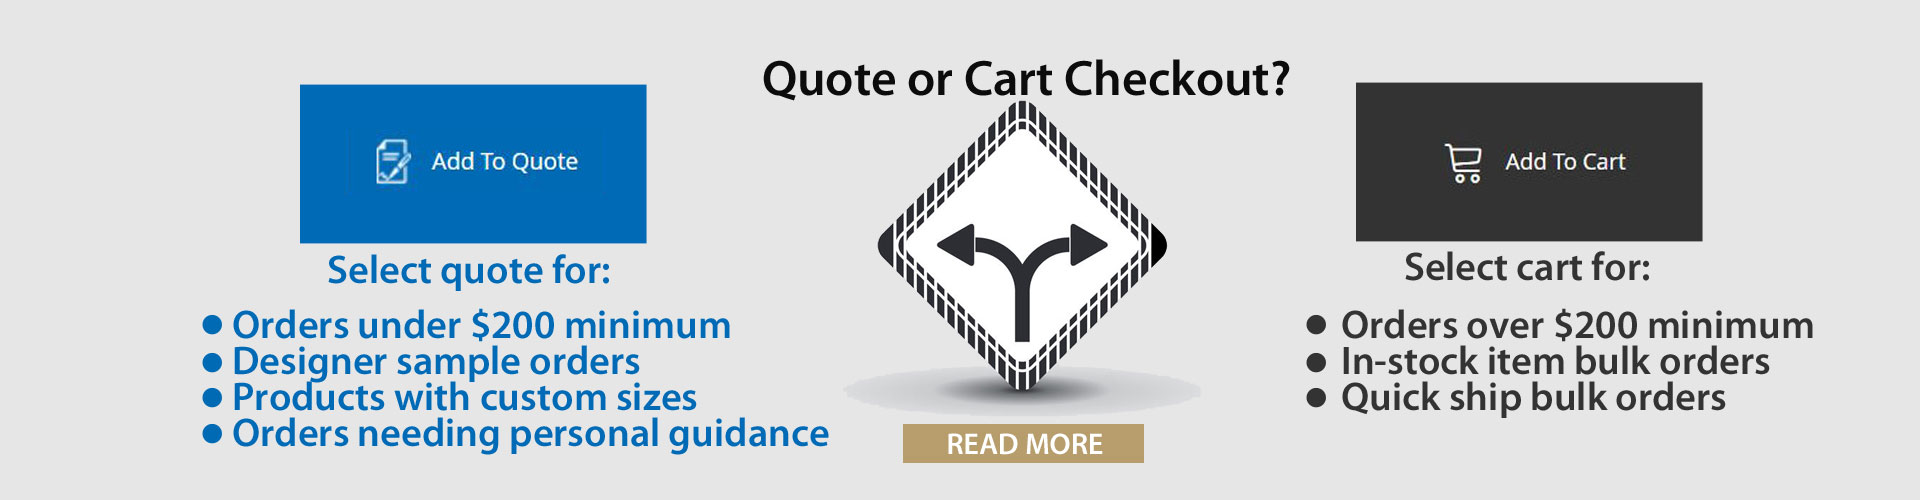 quote or cart banner